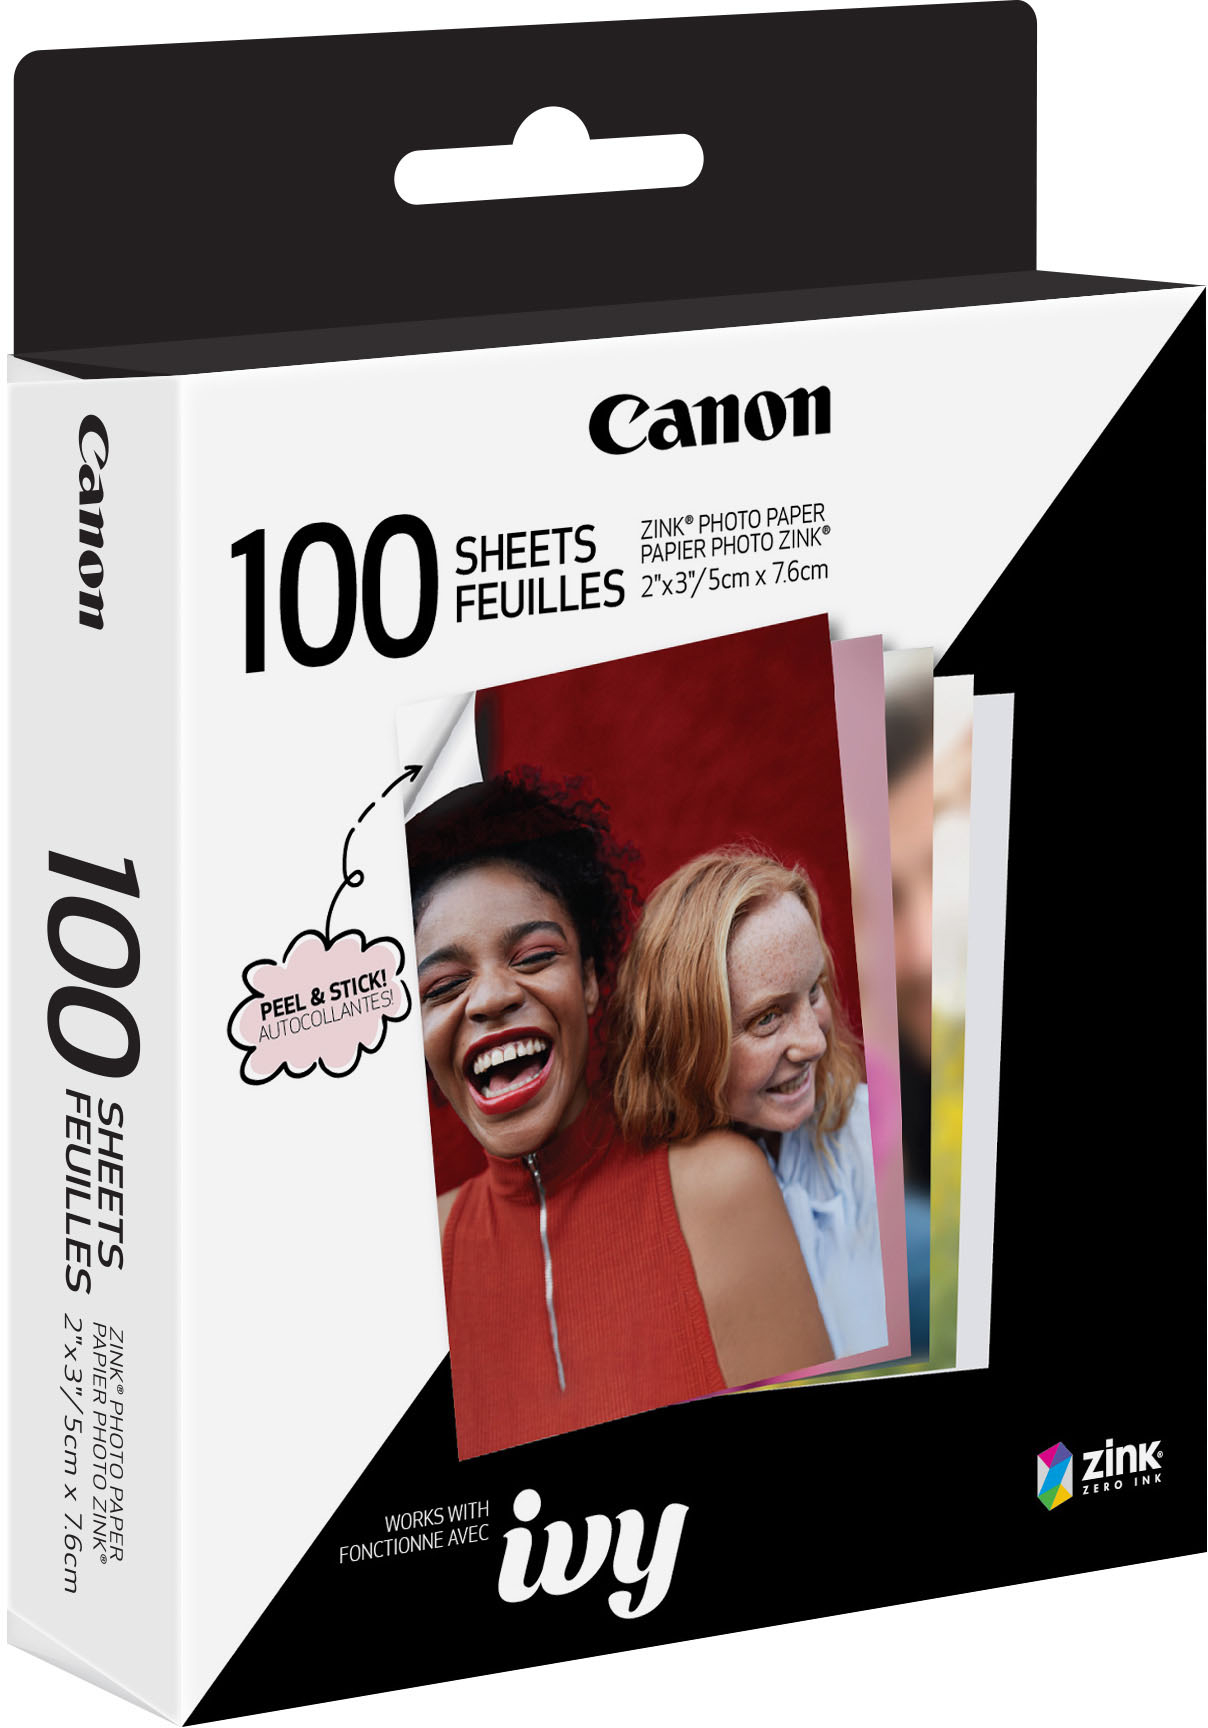 Canon 2x3” Zink Photo Paper Pack (20 sheets)